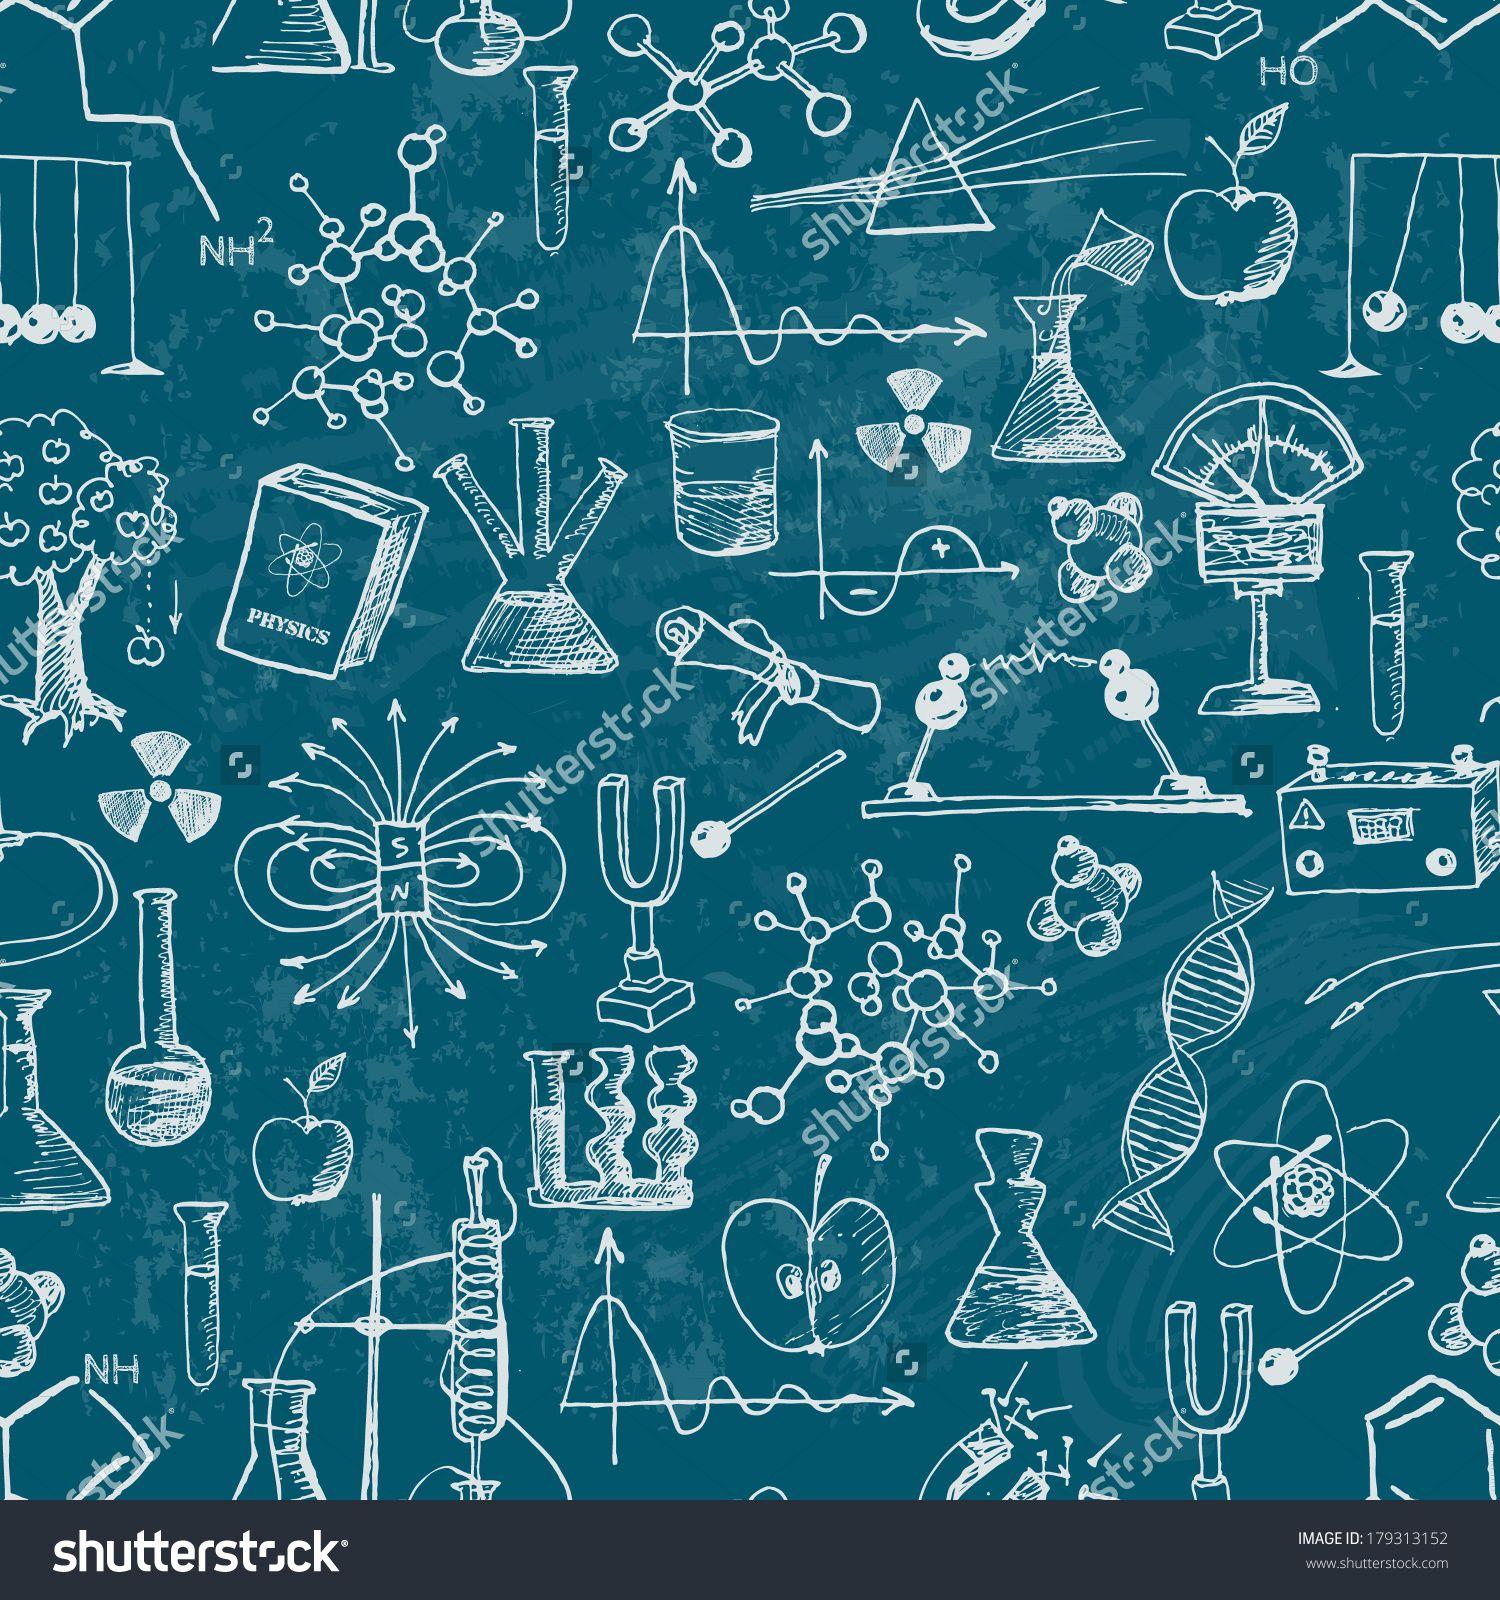 200+] Chemistry Wallpapers | Wallpapers.com